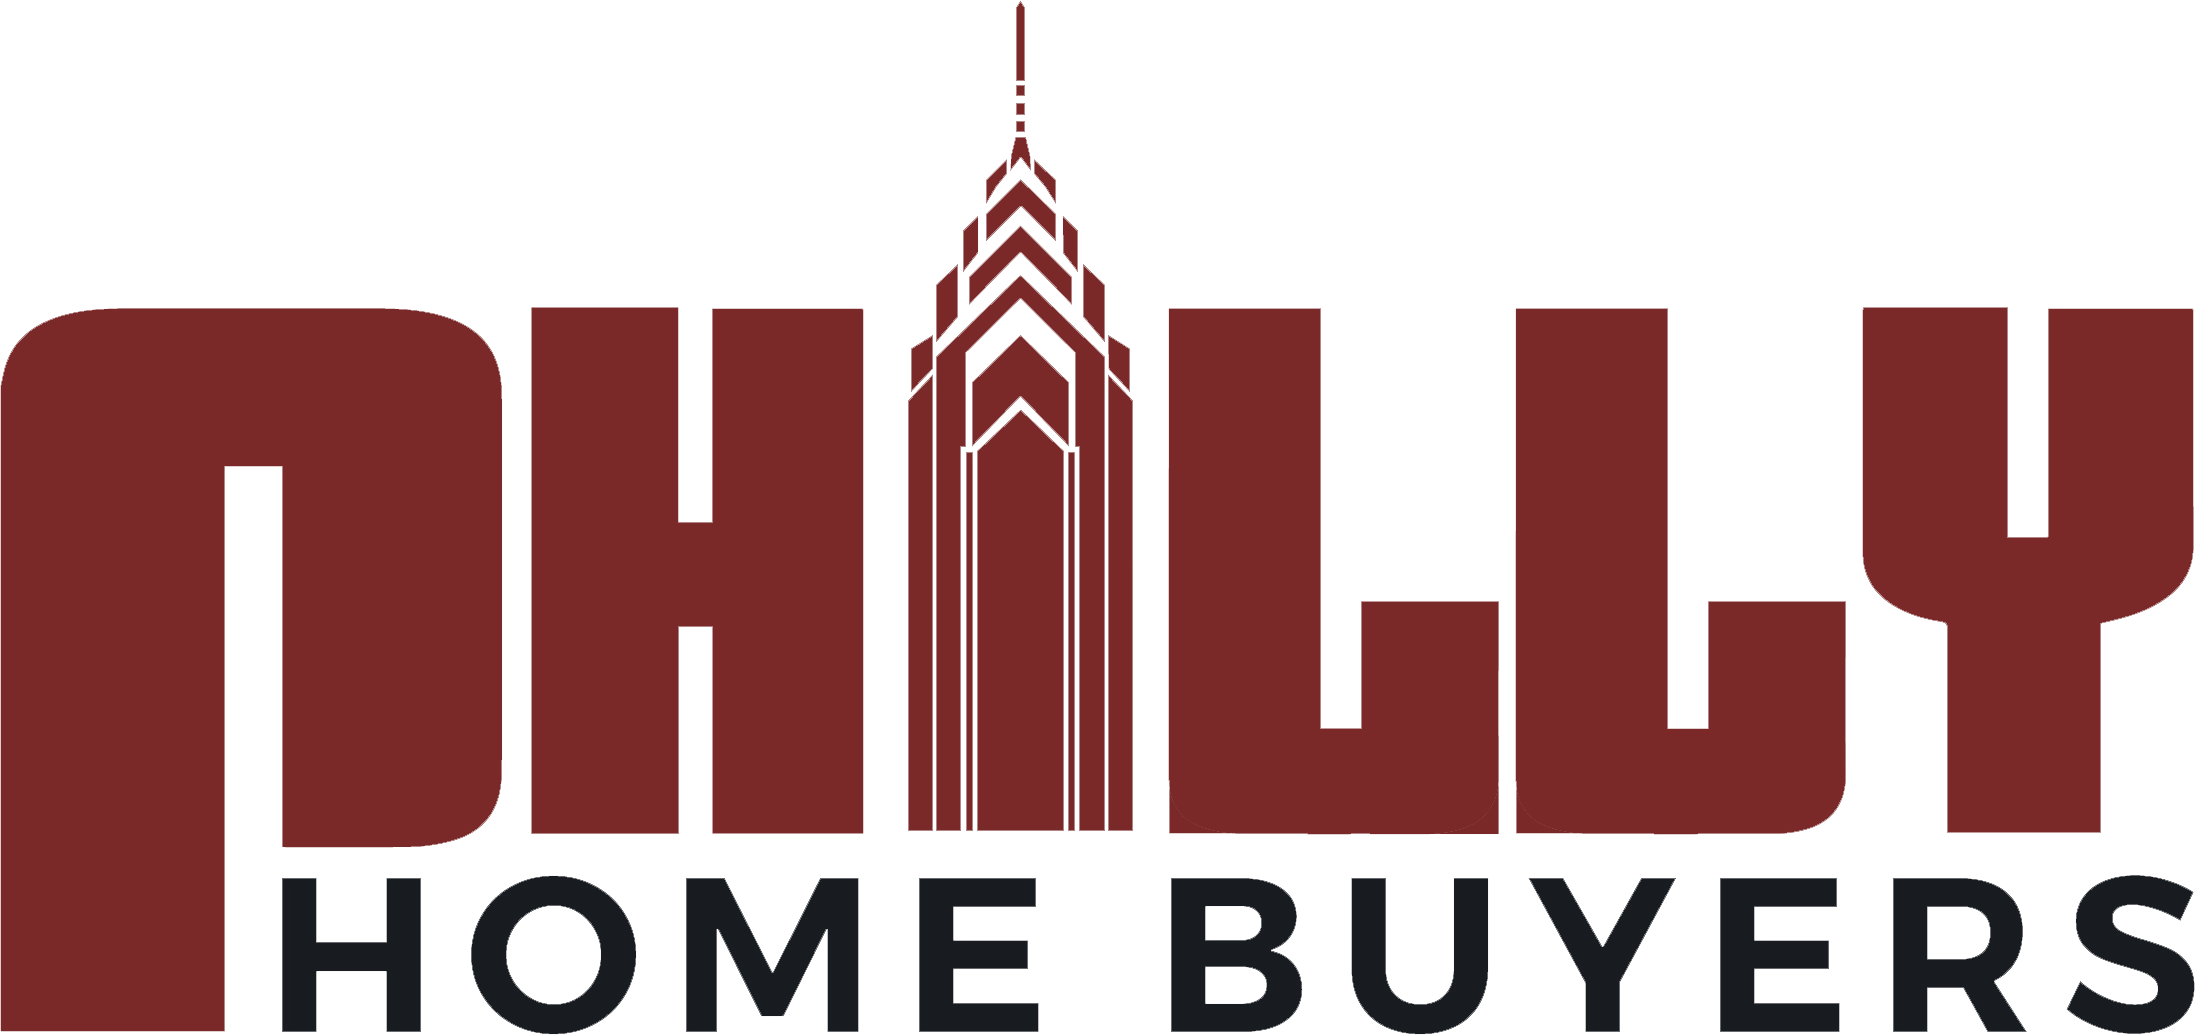 Philly Home Buyers - Sell My House Fast Philadelphia (2195x1035)